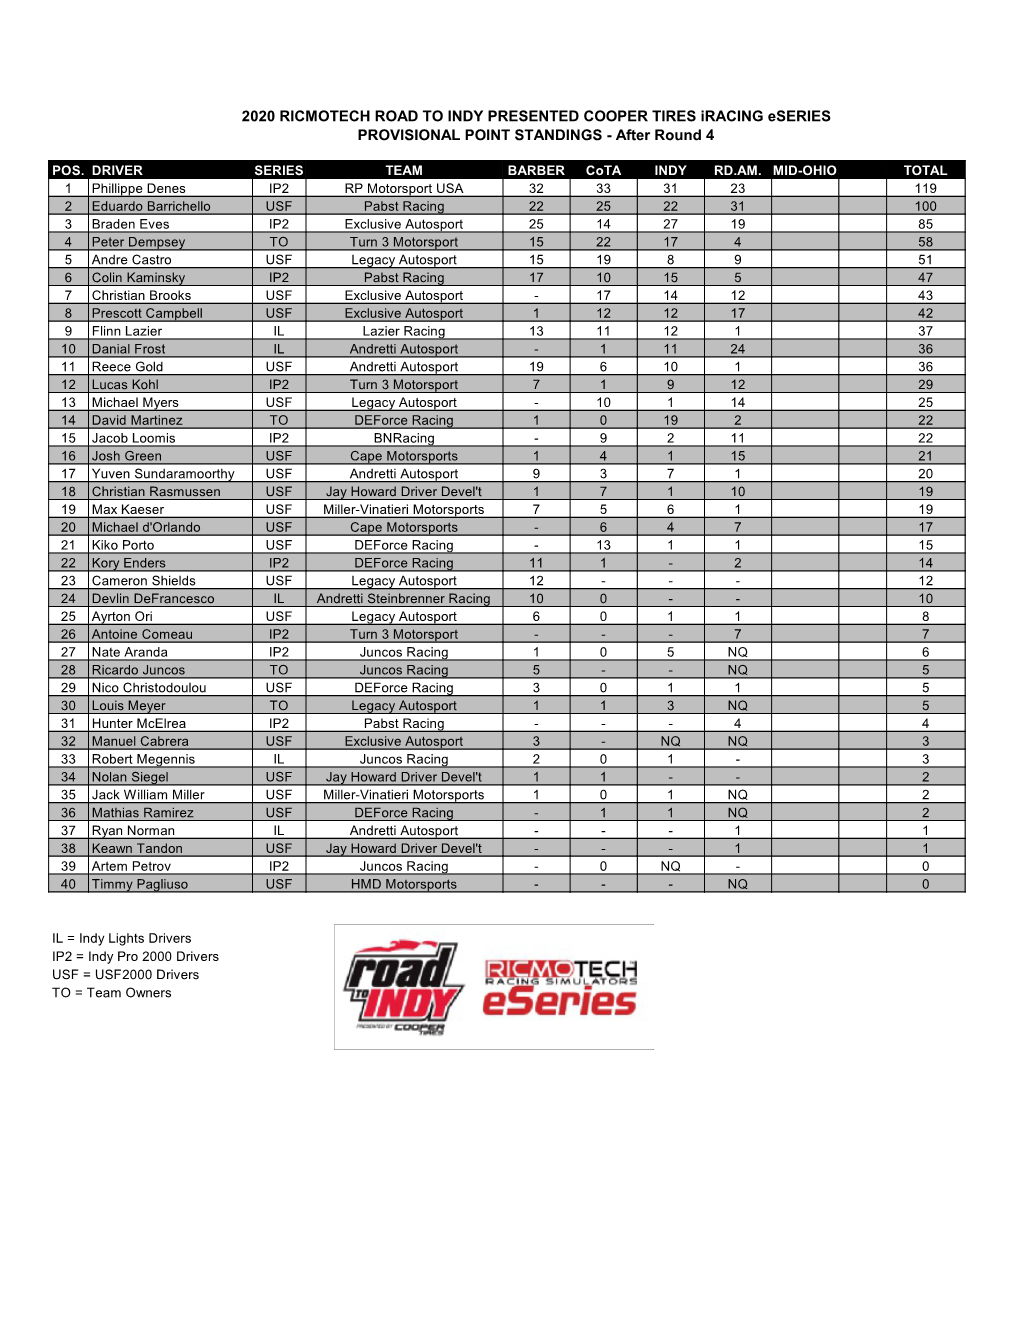 2020 RICMOTECH ROAD to INDY PRESENTED COOPER TIRES Iracing Eseries PROVISIONAL POINT STANDINGS - After Round 4